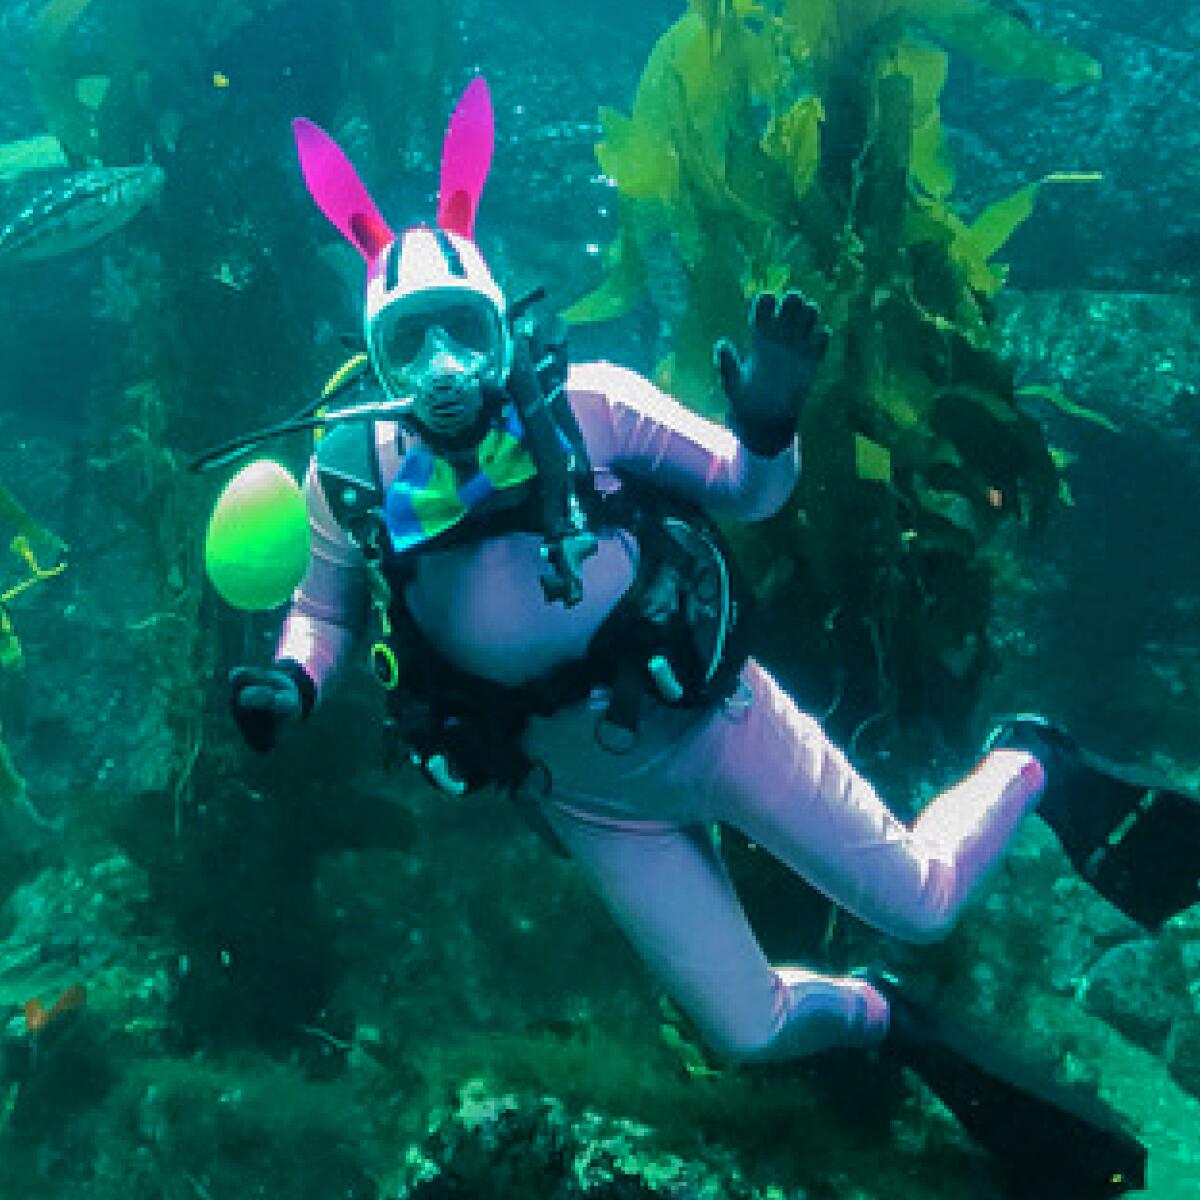 For a virtual visit to Birch Aquarium in La Jolla, watch Scuba Bunny feed the fishes live inside Birch Aquarium's giant kelp forest tank — starting 10:30 am. Easter Sunday, April 12, 2020 at facebook.com/birchaquarium